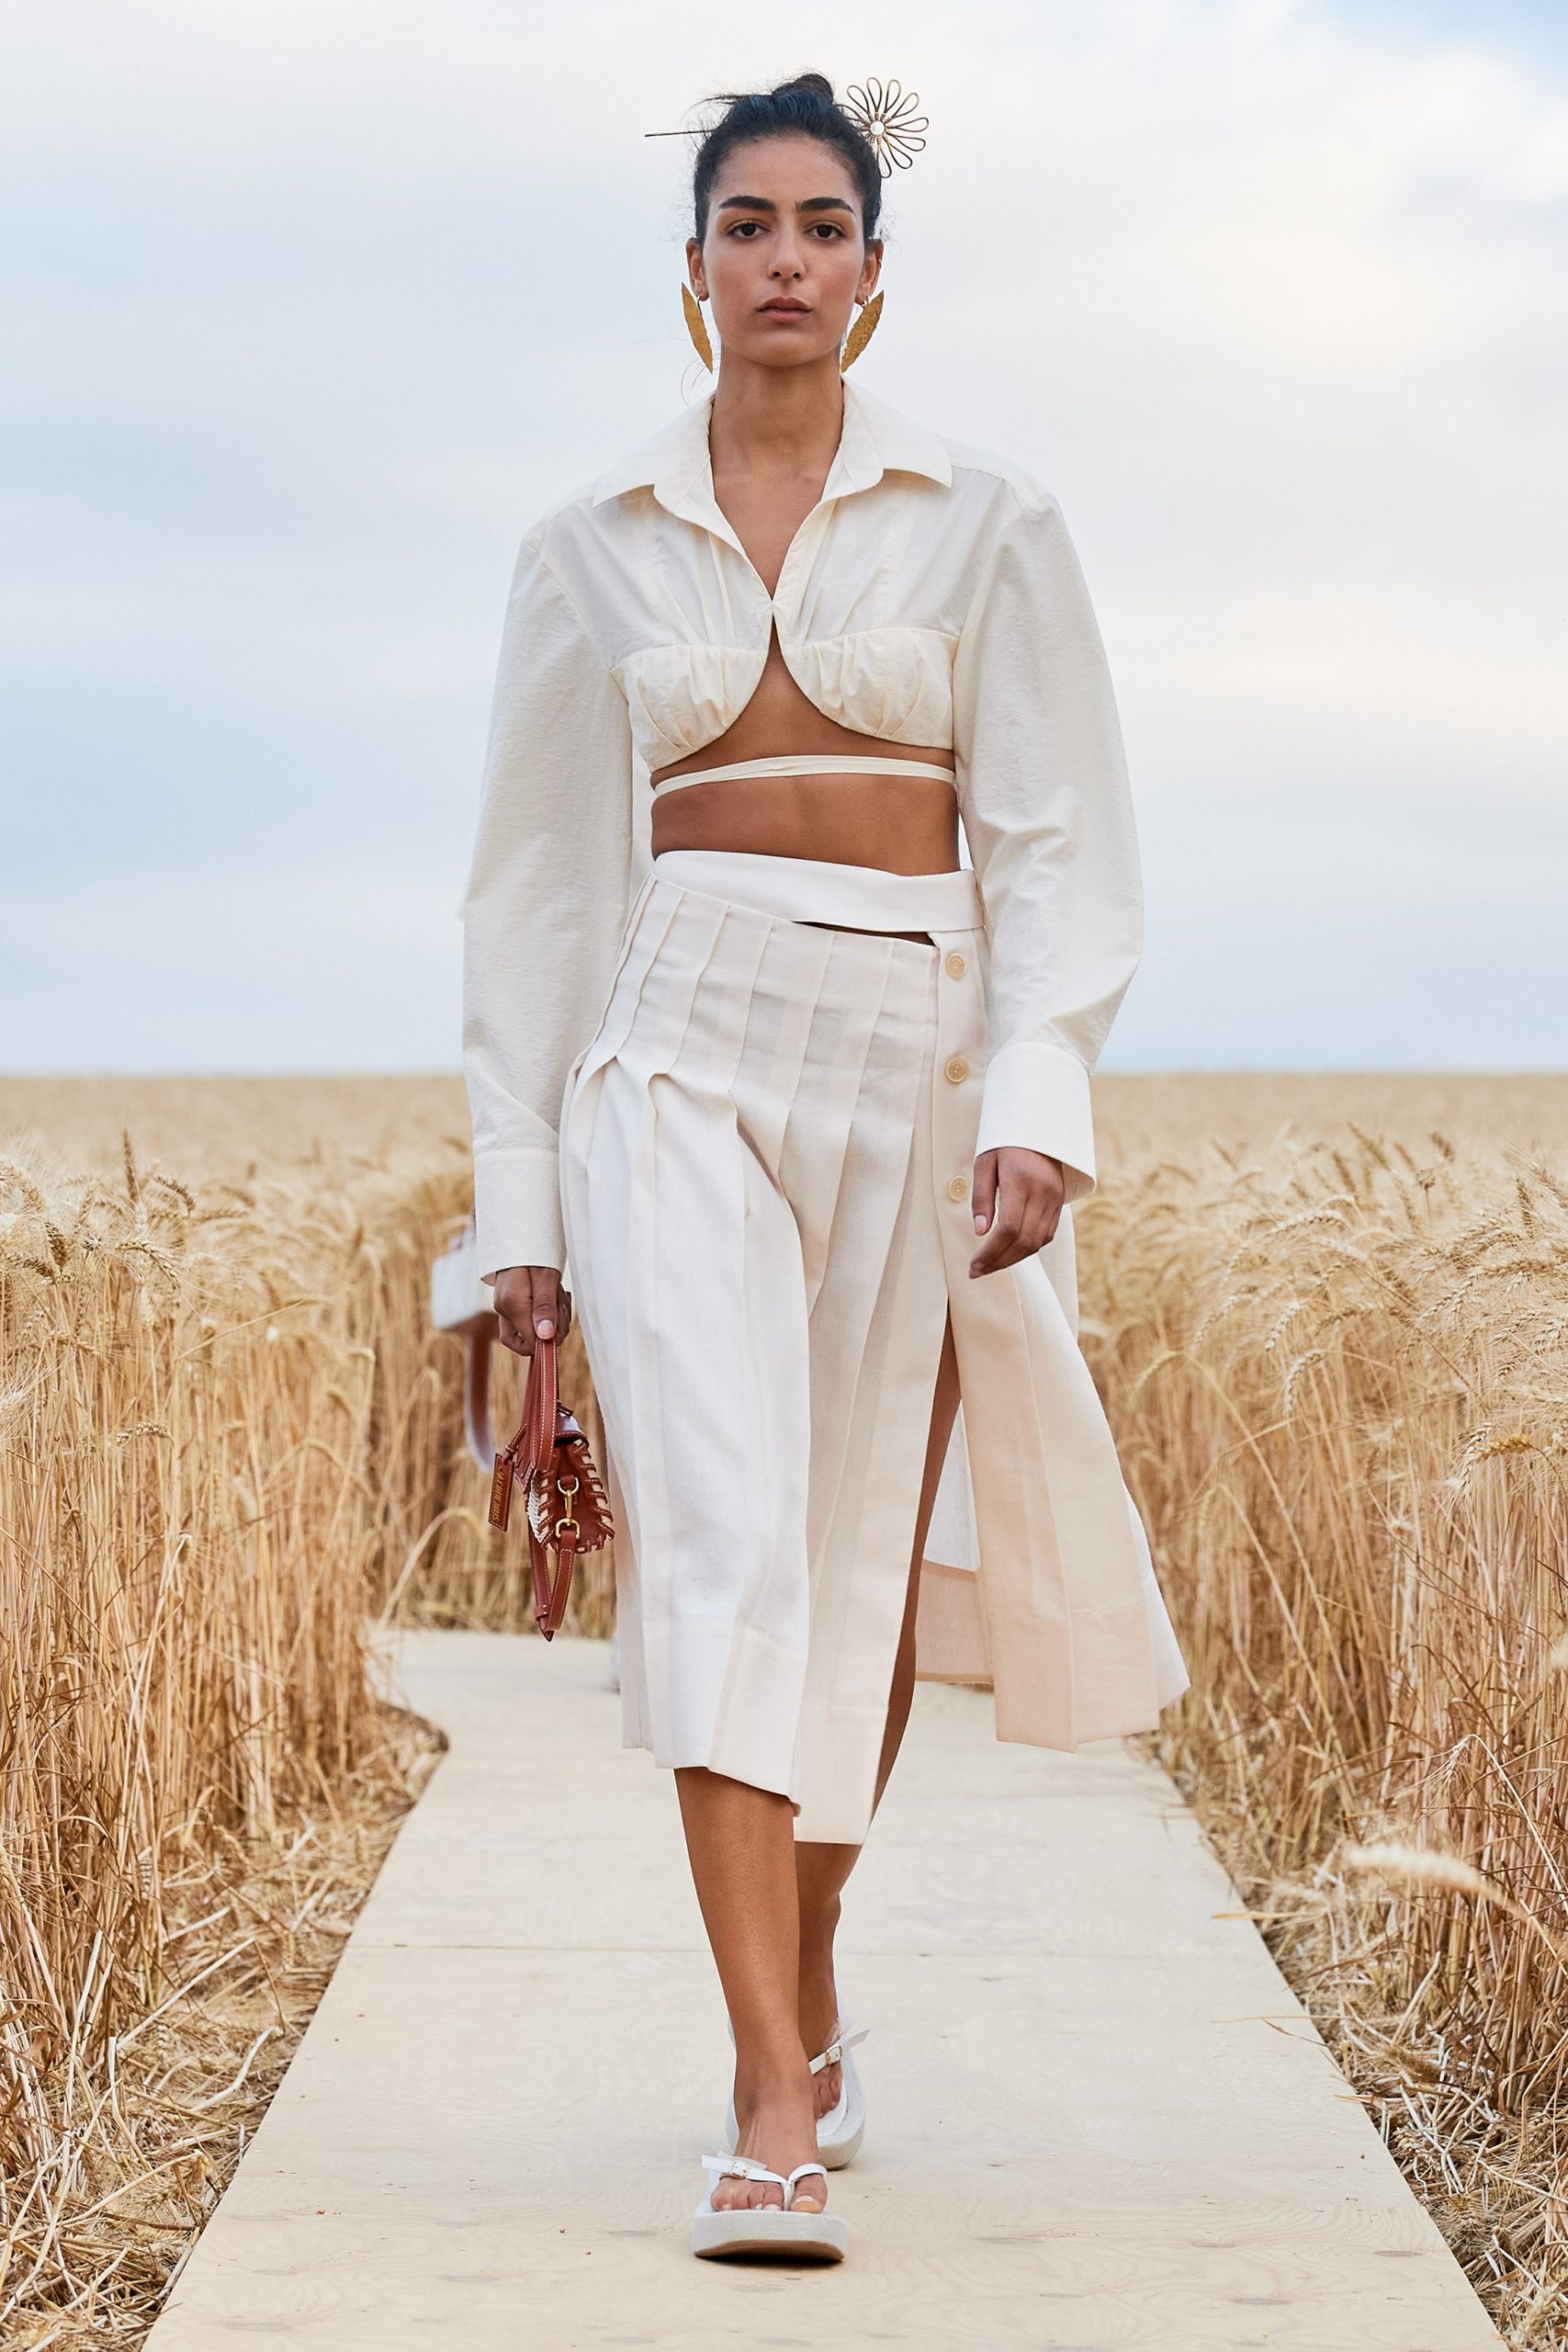 Jacquemus Spring 2021 Featured Plus Size Models In Minis & Crop Tops